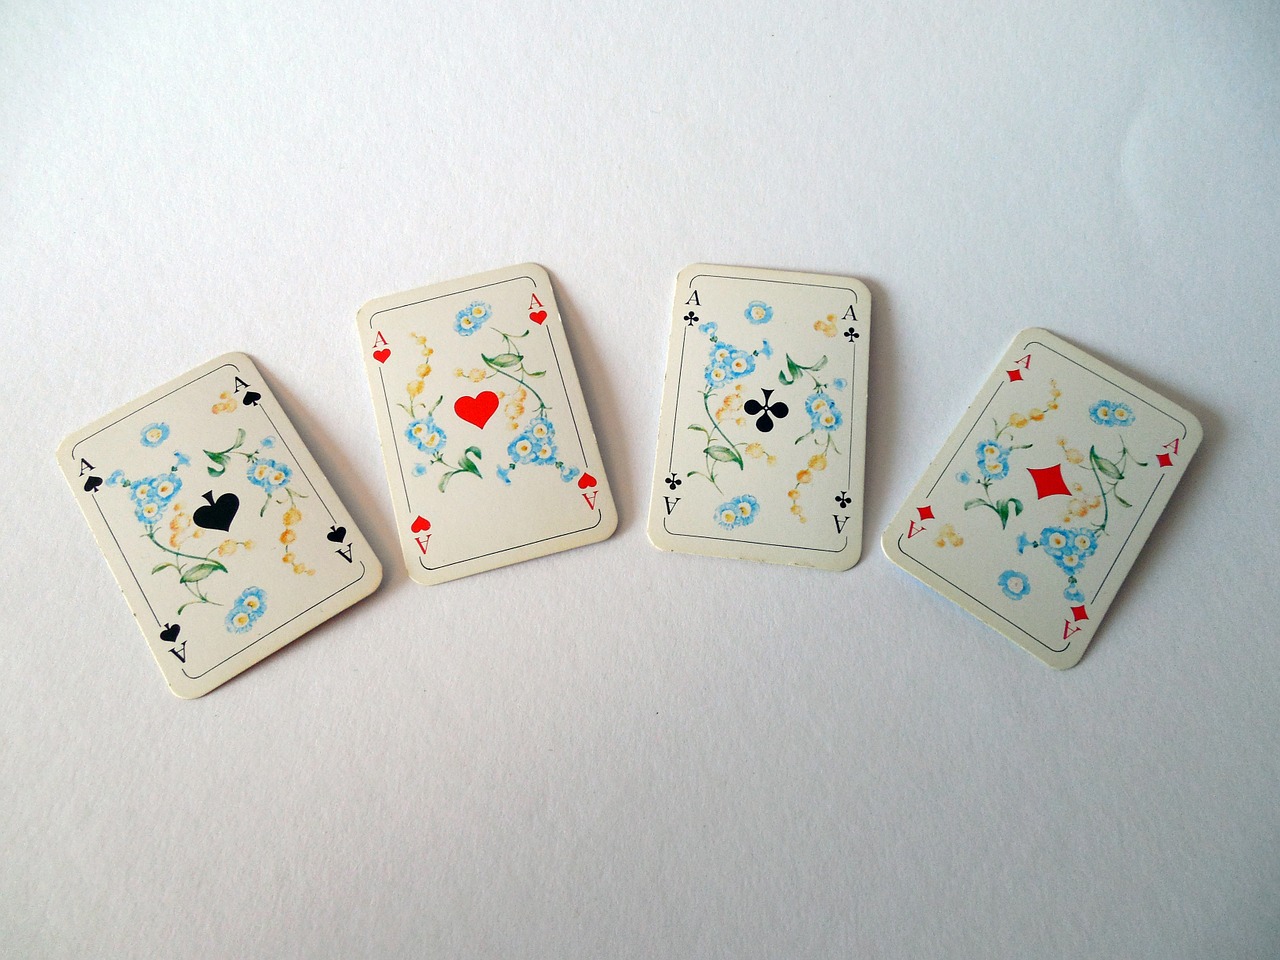 cards playing cards aces free photo